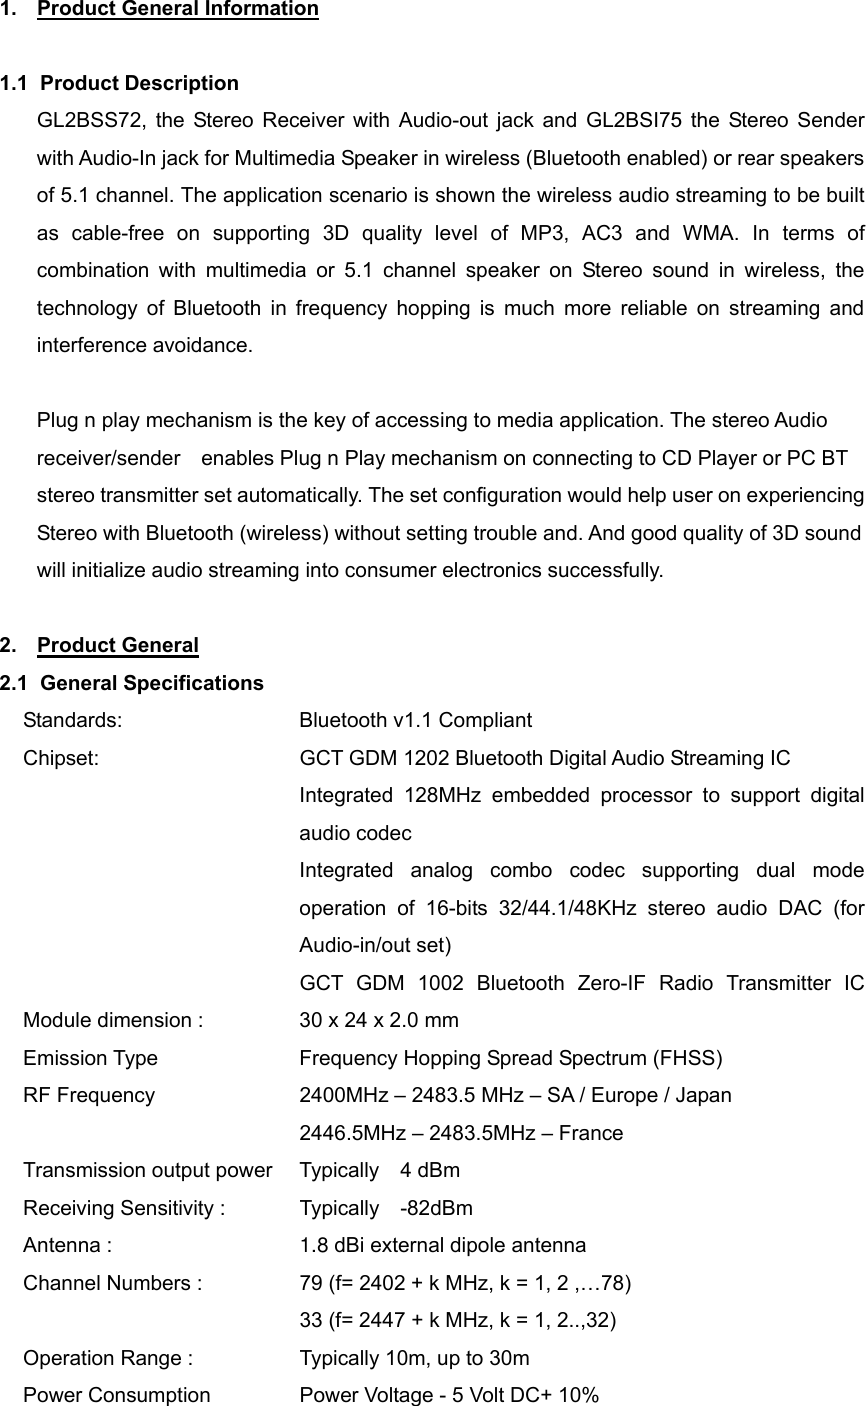 1.  Product General Information  1.1 Product Description GL2BSS72, the Stereo Receiver with Audio-out jack and GL2BSI75 the Stereo Sender with Audio-In jack for Multimedia Speaker in wireless (Bluetooth enabled) or rear speakers of 5.1 channel. The application scenario is shown the wireless audio streaming to be built as cable-free on supporting 3D quality level of MP3, AC3 and WMA. In terms of combination with multimedia or 5.1 channel speaker on Stereo sound in wireless, the technology of Bluetooth in frequency hopping is much more reliable on streaming and interference avoidance.    Plug n play mechanism is the key of accessing to media application. The stereo Audio receiver/sender    enables Plug n Play mechanism on connecting to CD Player or PC BT stereo transmitter set automatically. The set configuration would help user on experiencing Stereo with Bluetooth (wireless) without setting trouble and. And good quality of 3D sound will initialize audio streaming into consumer electronics successfully.  2. Product General 2.1 General Specifications Standards:    Bluetooth v1.1 Compliant Chipset:                GCT GDM 1202 Bluetooth Digital Audio Streaming IC Integrated 128MHz embedded processor to support digital audio codec Integrated analog combo codec supporting dual mode operation of 16-bits 32/44.1/48KHz stereo audio DAC (for Audio-in/out set)                          GCT GDM 1002  Bluetooth Zero-IF  Radio  Transmitter  IC            Module dimension :            30 x 24 x 2.0 mm   Emission Type      Frequency Hopping Spread Spectrum (FHSS) RF Frequency      2400MHz – 2483.5 MHz – SA / Europe / Japan                            2446.5MHz – 2483.5MHz – France Transmission output power   Typically  4 dBm Receiving Sensitivity :        Typically  -82dBm Antenna :                 1.8 dBi external dipole antenna Channel Numbers :                79 (f= 2402 + k MHz, k = 1, 2 ,…78)               33 (f= 2447 + k MHz, k = 1, 2..,32) Operation Range :                Typically 10m, up to 30m Power Consumption                Power Voltage - 5 Volt DC+ 10% 